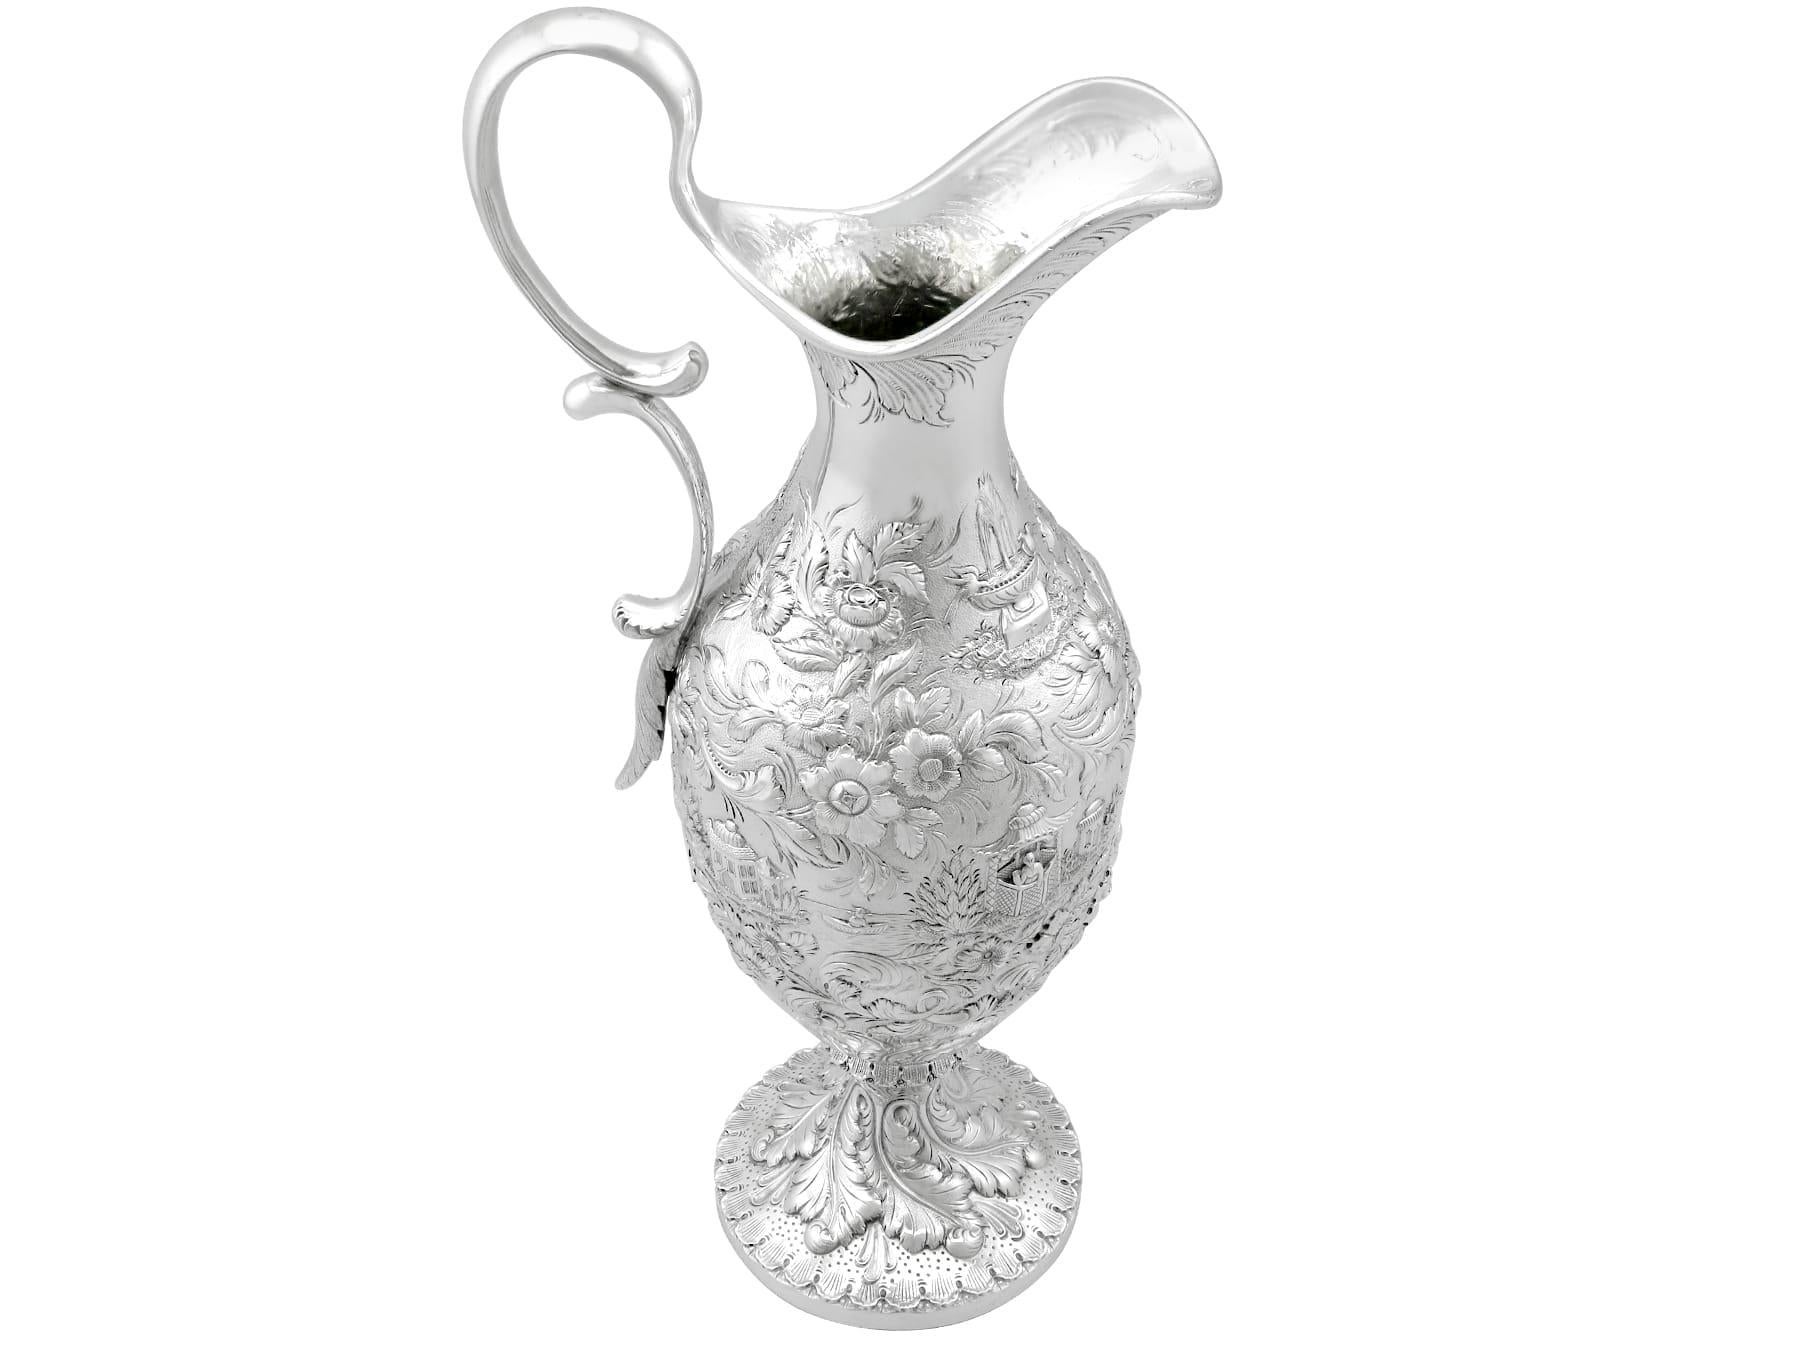 Unknown 19th Century American Silver Claret Jug For Sale